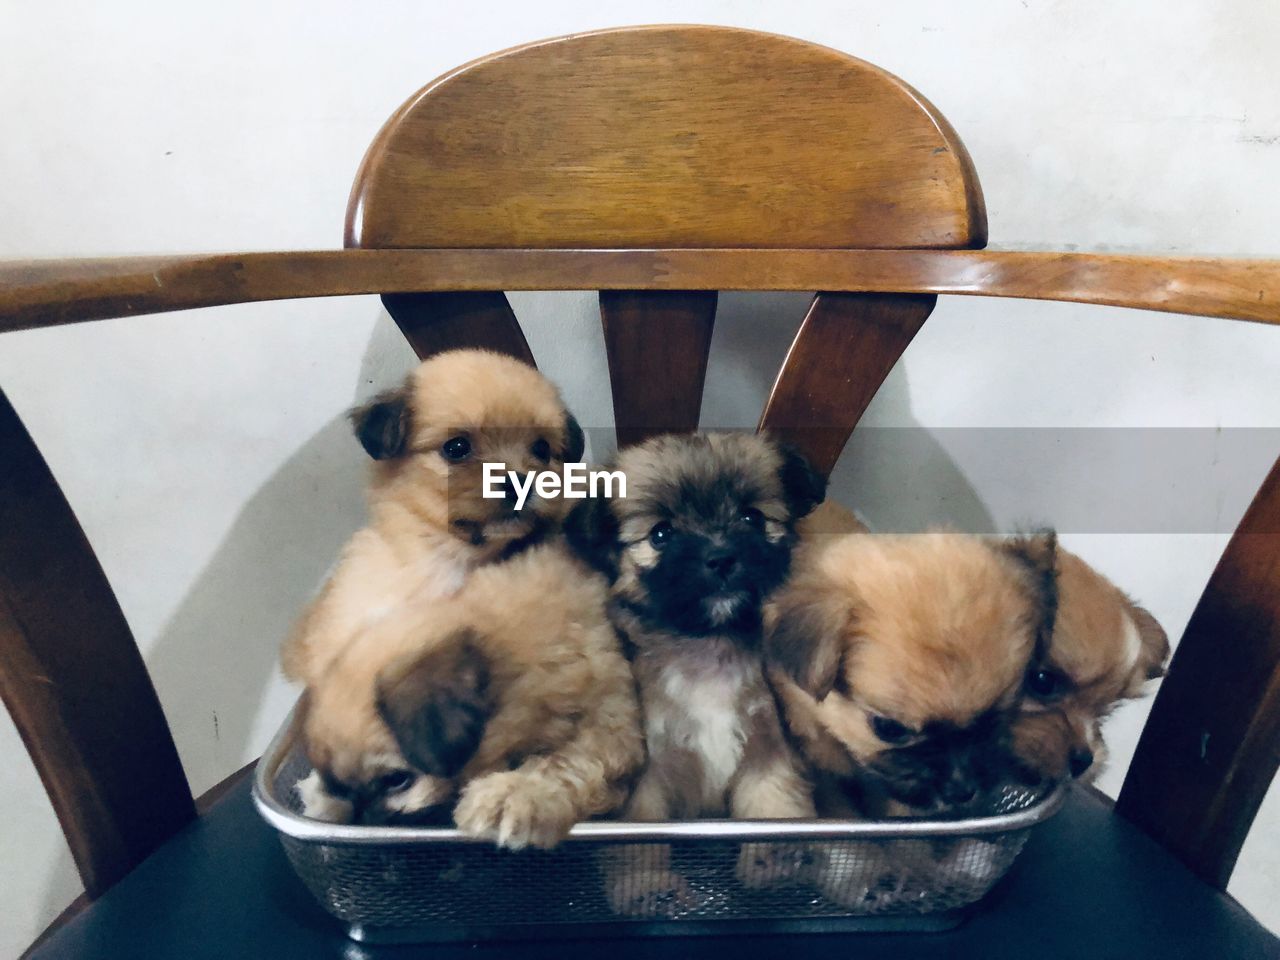 DOGS SITTING ON SEAT IN A KITCHEN